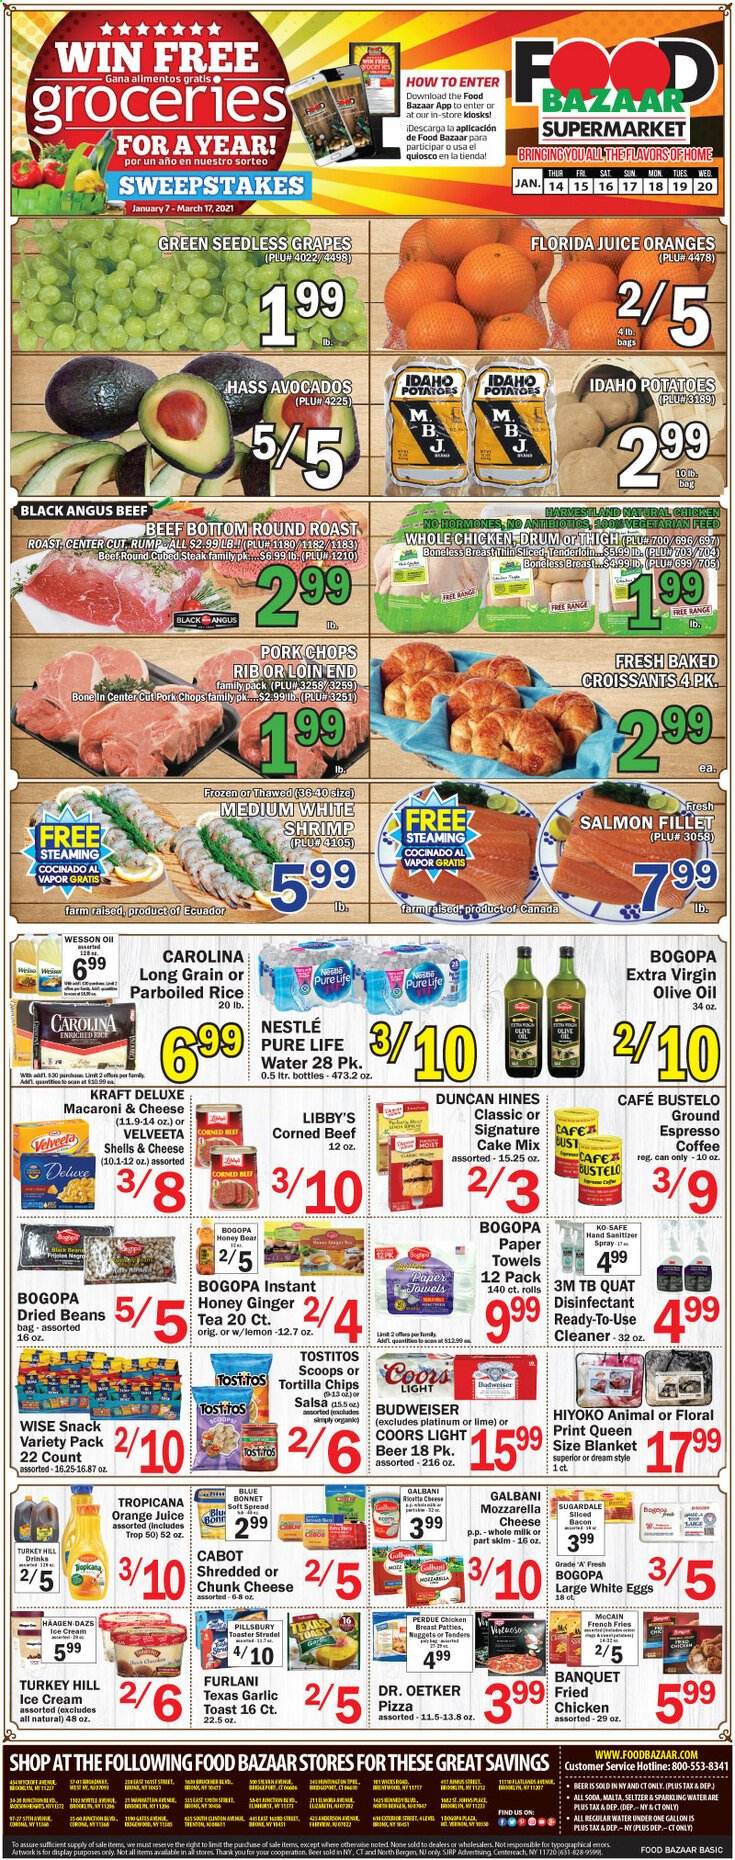 thumbnail - Food Bazaar Flyer - 01/14/2021 - 01/20/2021 - Sales products - Budweiser, Coors, seedless grapes, toast bread, cake mix, croissant, ginger, salmon, salmon fillet, shrimps, macaroni & cheese, pizza, nuggets, fried chicken, Pillsbury, Perdue®, Kraft®, bacon, mozzarella, Dr. Oetker, Galbani, chunk cheese, milk, eggs, salsa, ice cream, Häagen-Dazs, beans, McCain, potato fries, french fries, Nestlé, tortilla chips, snack, Tostitos, garlic, rice, parboiled rice, extra virgin olive oil, olive oil, honey, orange juice, soda, juice, seltzer water, sparkling water, Pure Life Water, tea, coffee, beer, whole chicken, beef meat, corned beef, steak, round roast, pork chops, pork meat, avocado, grapes. Page 1.